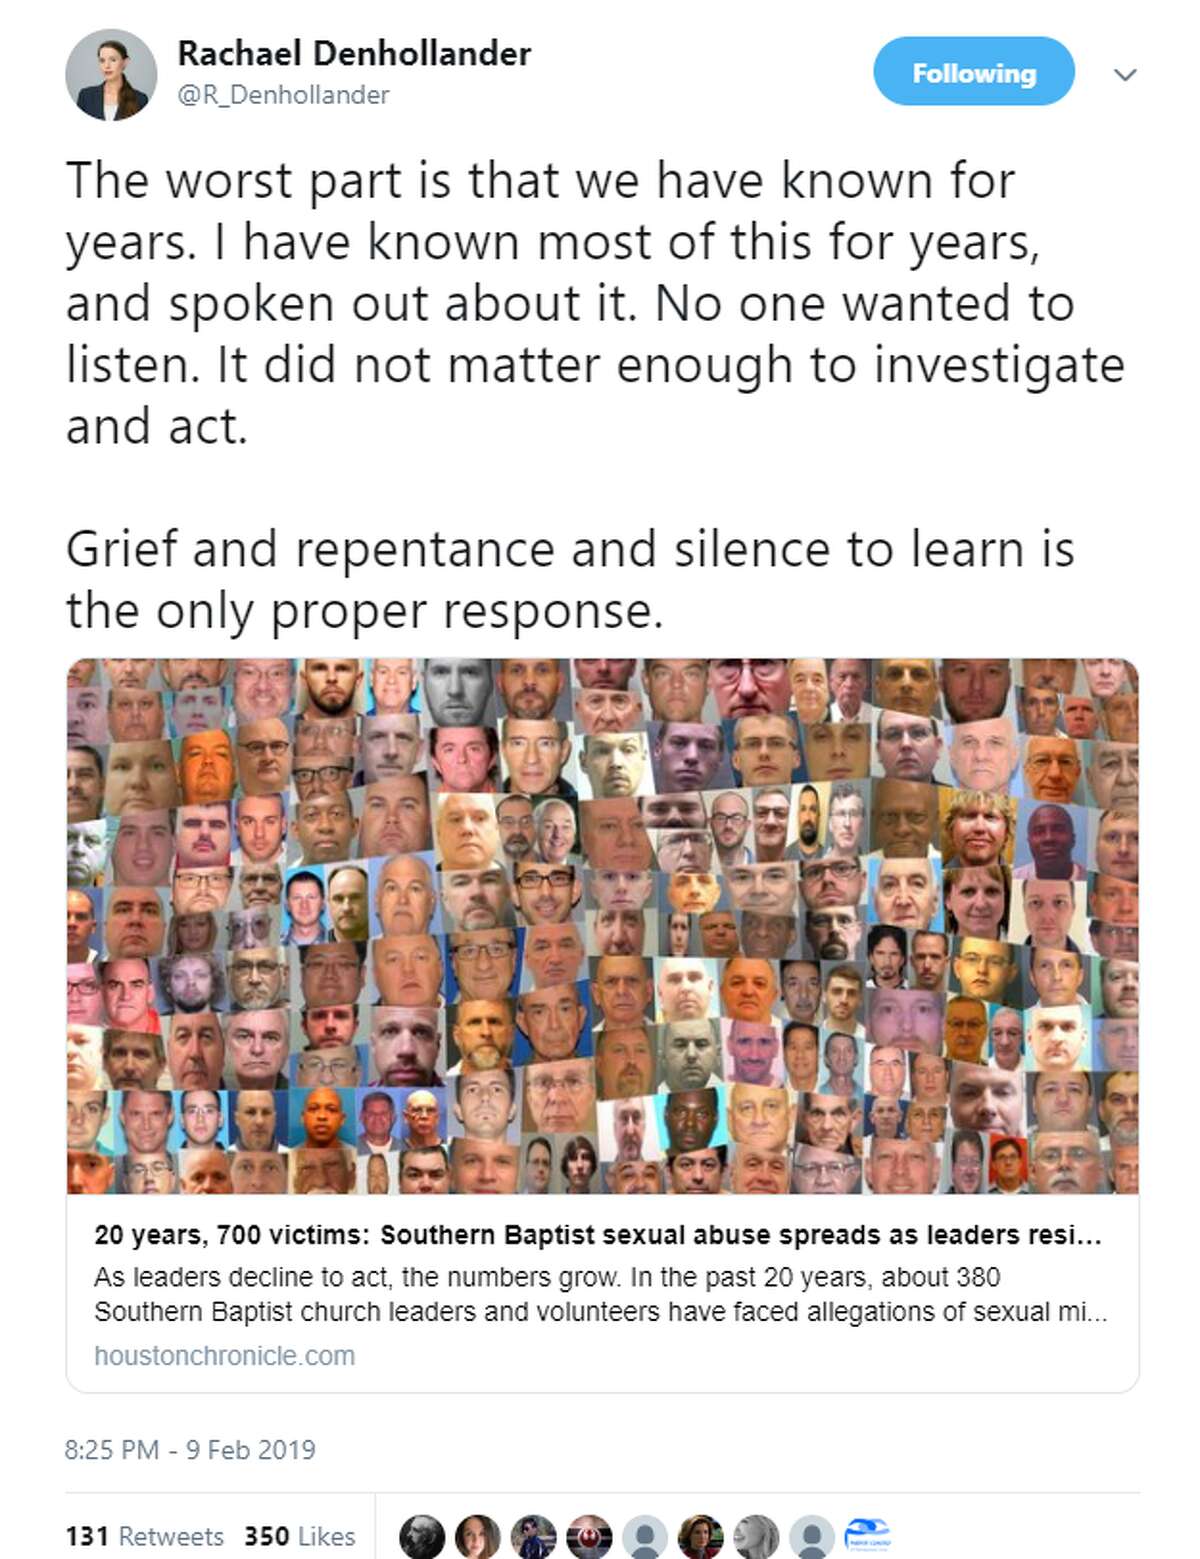 "I have known most of this for years, and spoken out about it. No one wanted to listen. It did not matter enough to investigate and act. Grief and repentance and silence to learn is the only proper response." - @R_Denhollander